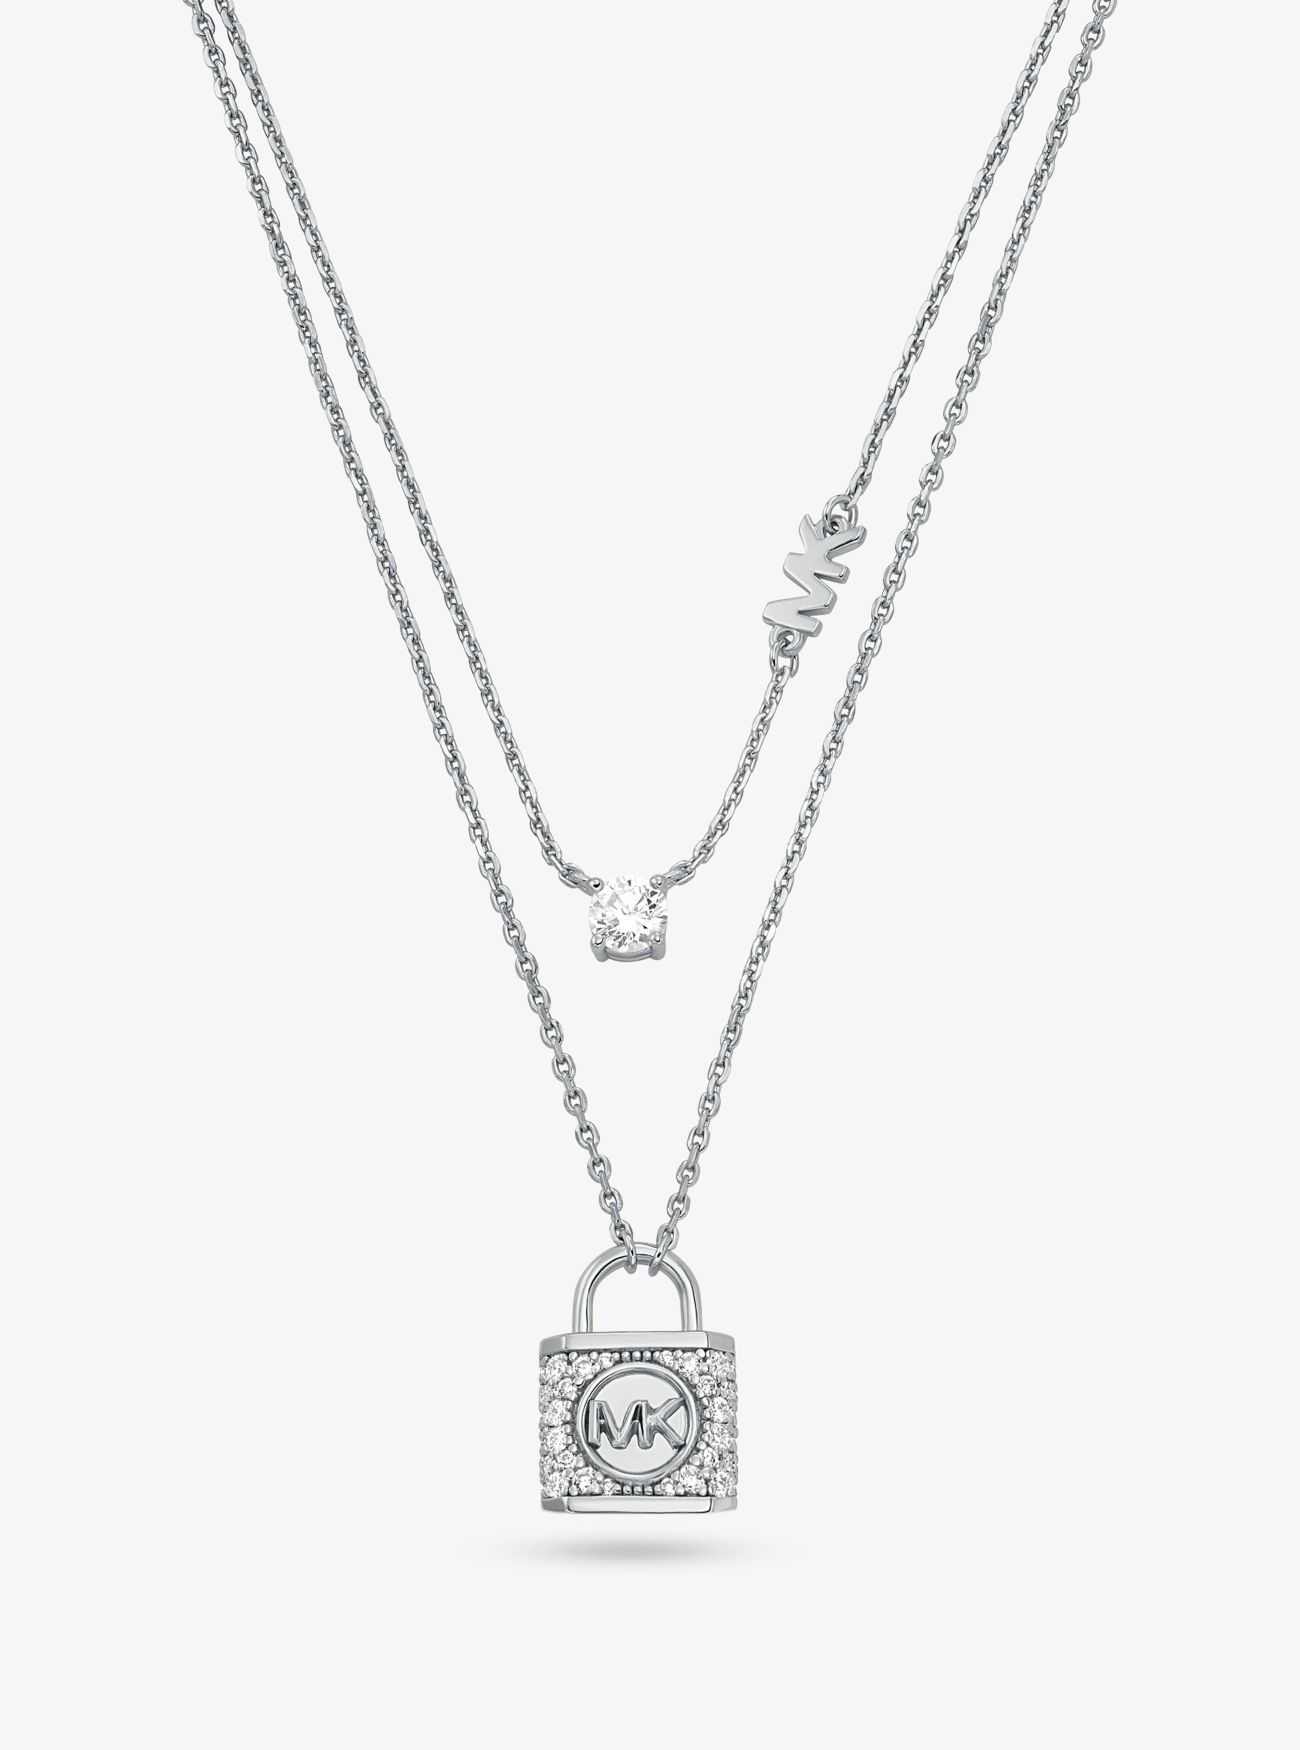 MK Precious Metal-Plated Sterling Silver Pavé Lock Layered Necklace - Silver - Michael Kors